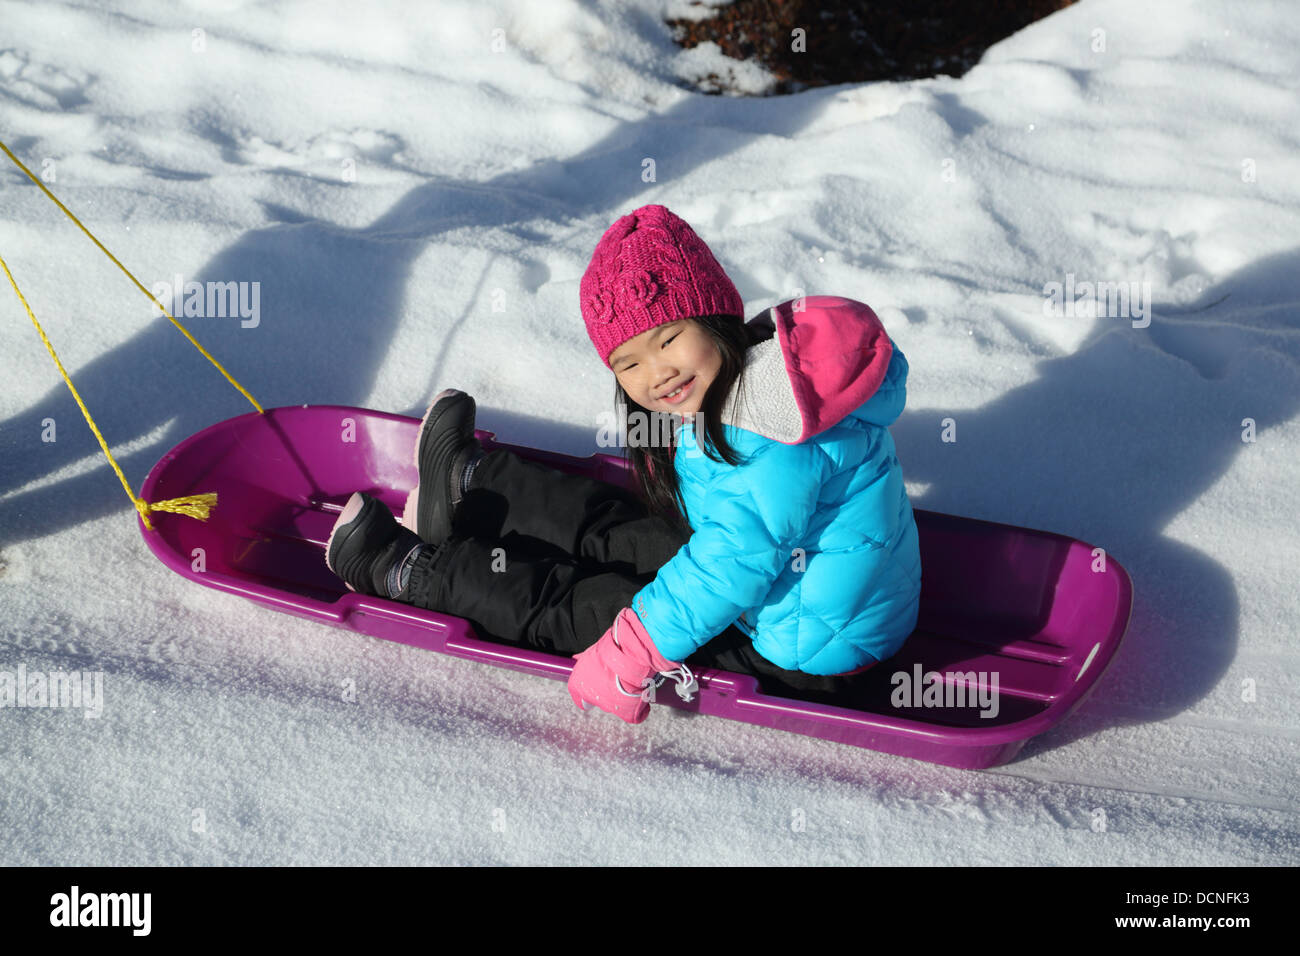 Young Asian girl on sled in snow Stock Photo